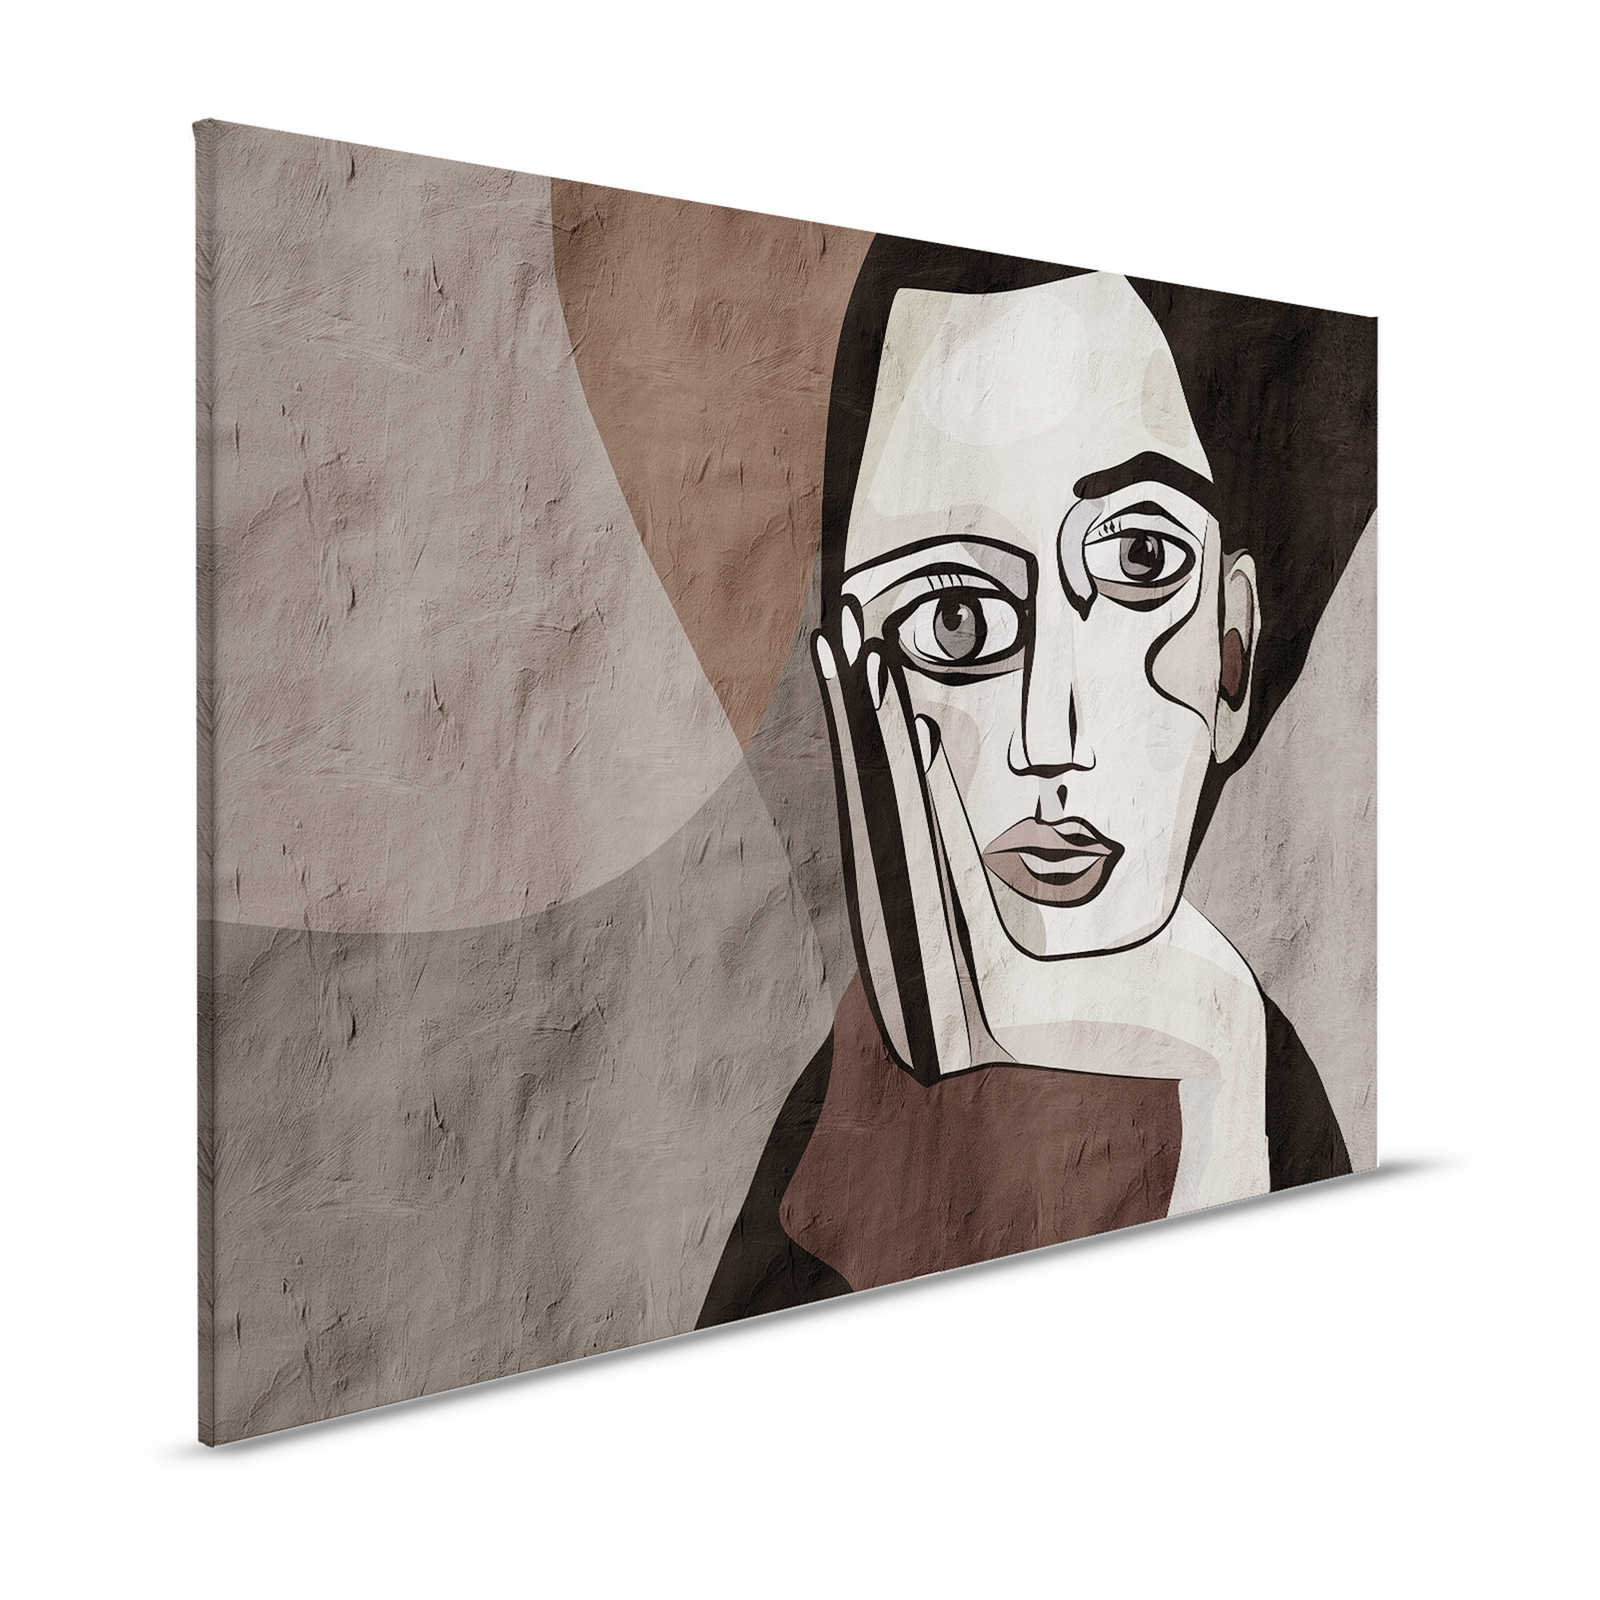 Think Tank 2 - Canvas painting Graffiti women face abstract - 1,20 m x 0,80 m
